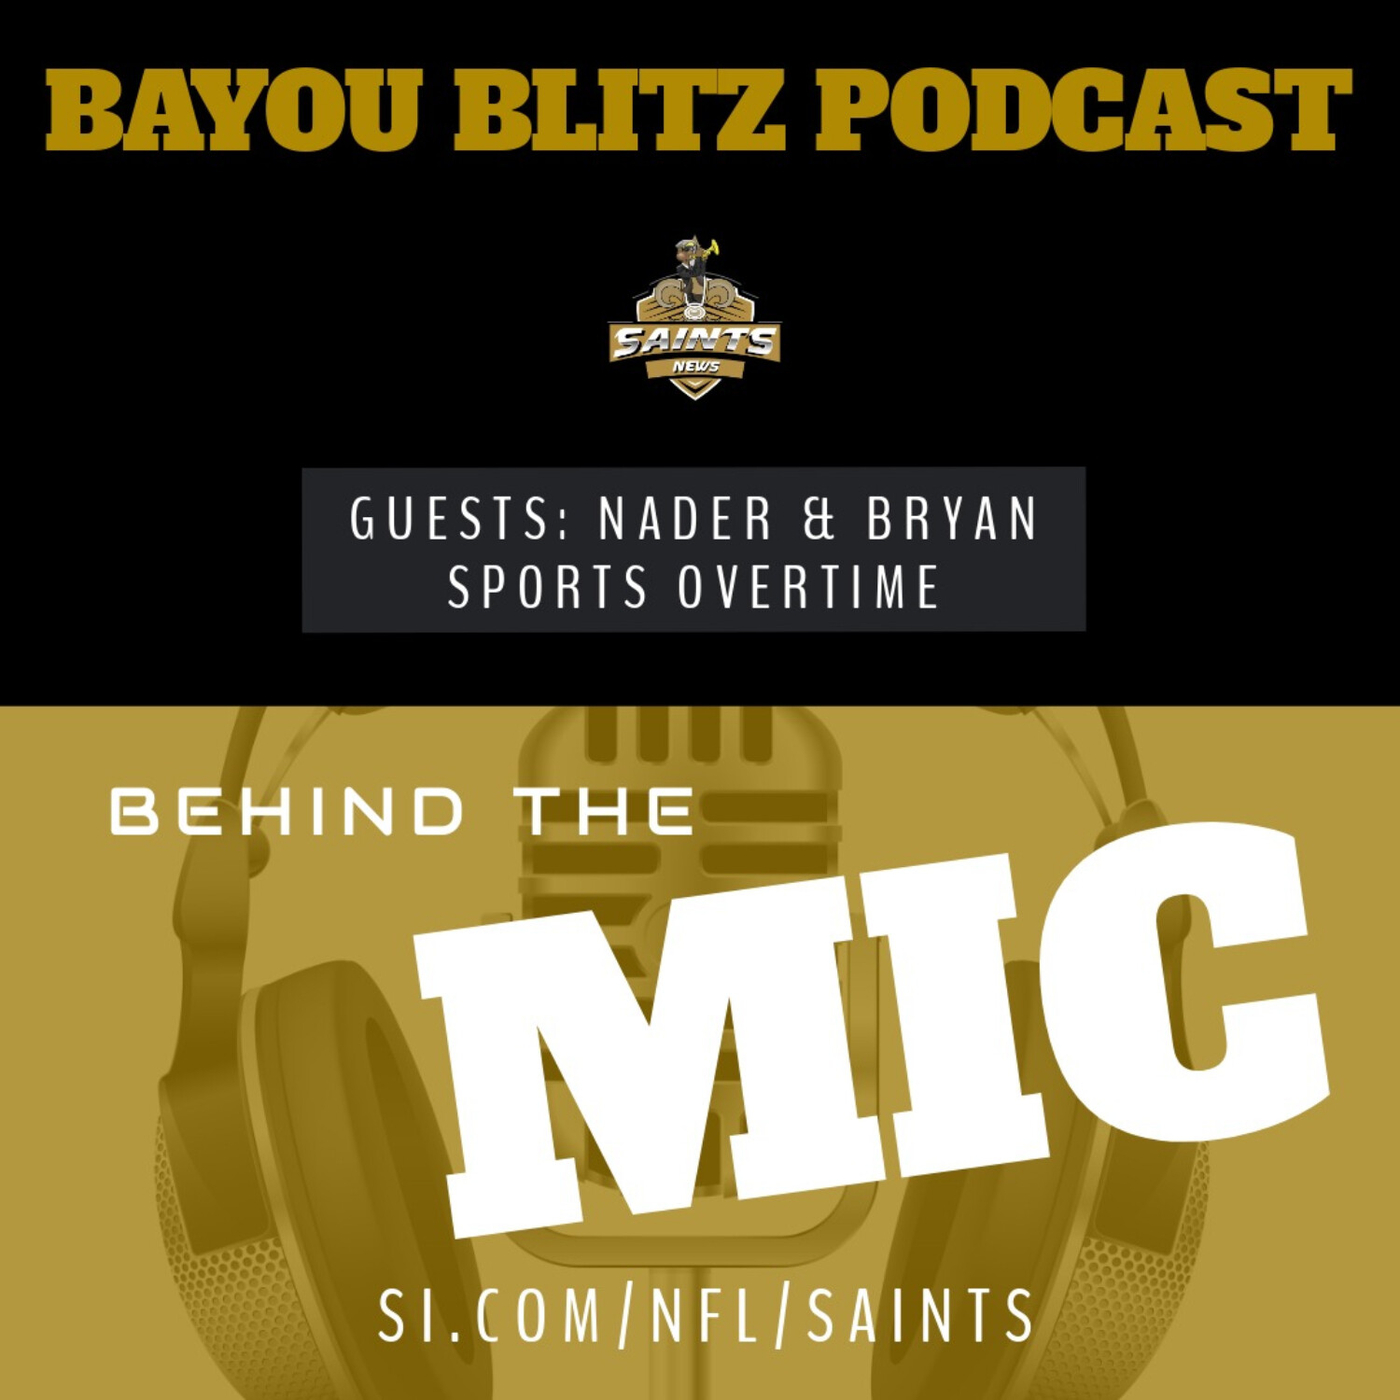 Bayou Blitz: Behind the Mic, Guests Nader &amp; Bryan of Sports Overtime